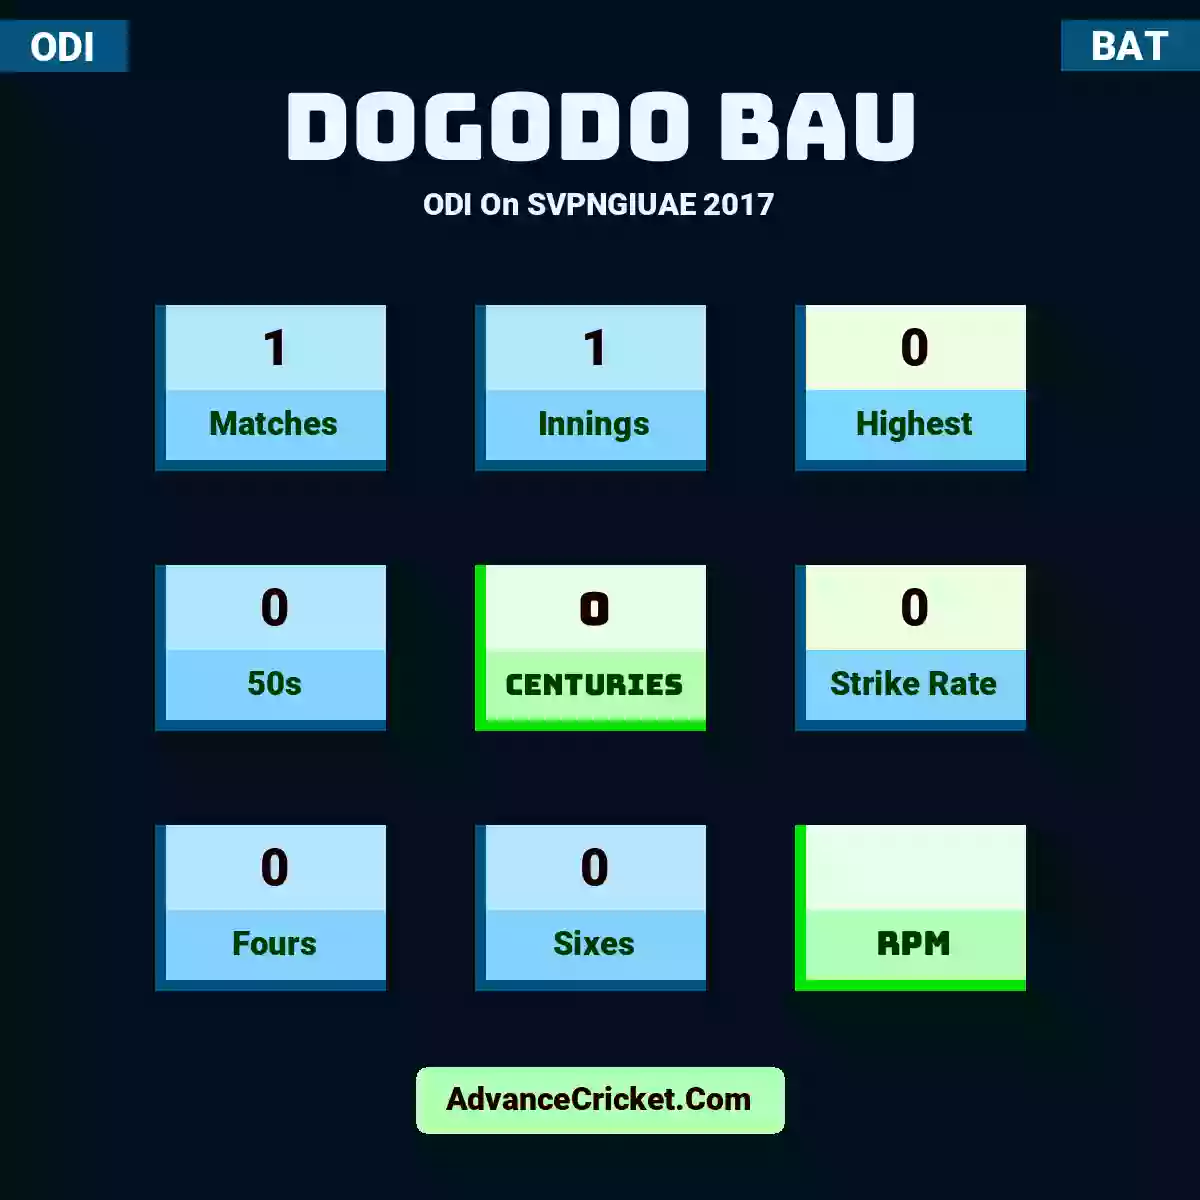 Dogodo Bau ODI  On SVPNGIUAE 2017, Dogodo Bau played 1 matches, scored 0 runs as highest, 0 half-centuries, and 0 centuries, with a strike rate of 0. D.Bau hit 0 fours and 0 sixes.